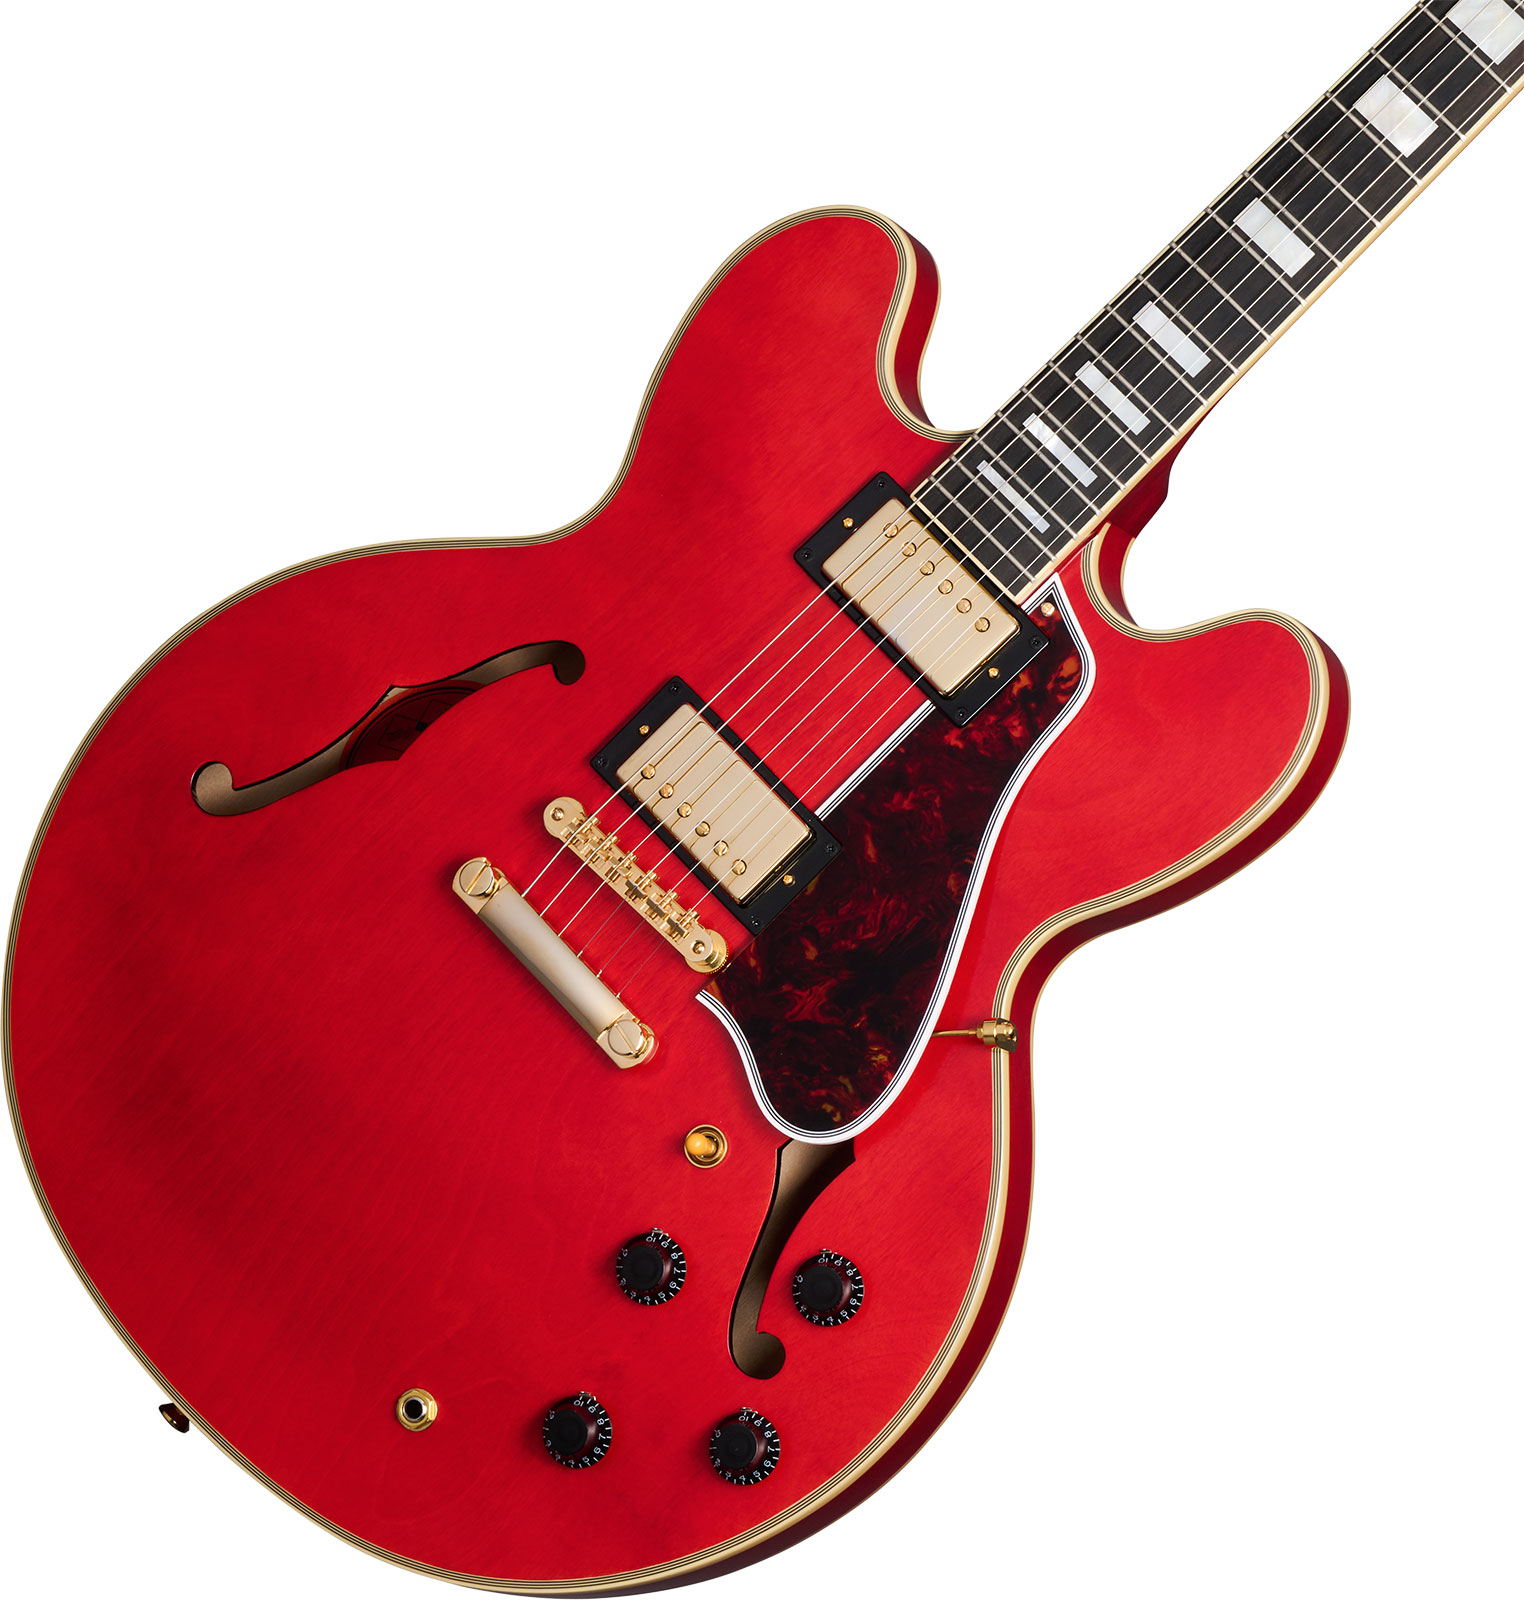 Epiphone Es355 1959 Inspired By 2h Gibson Ht Eb - Vos Cherry Red - Semi-hollow electric guitar - Variation 3